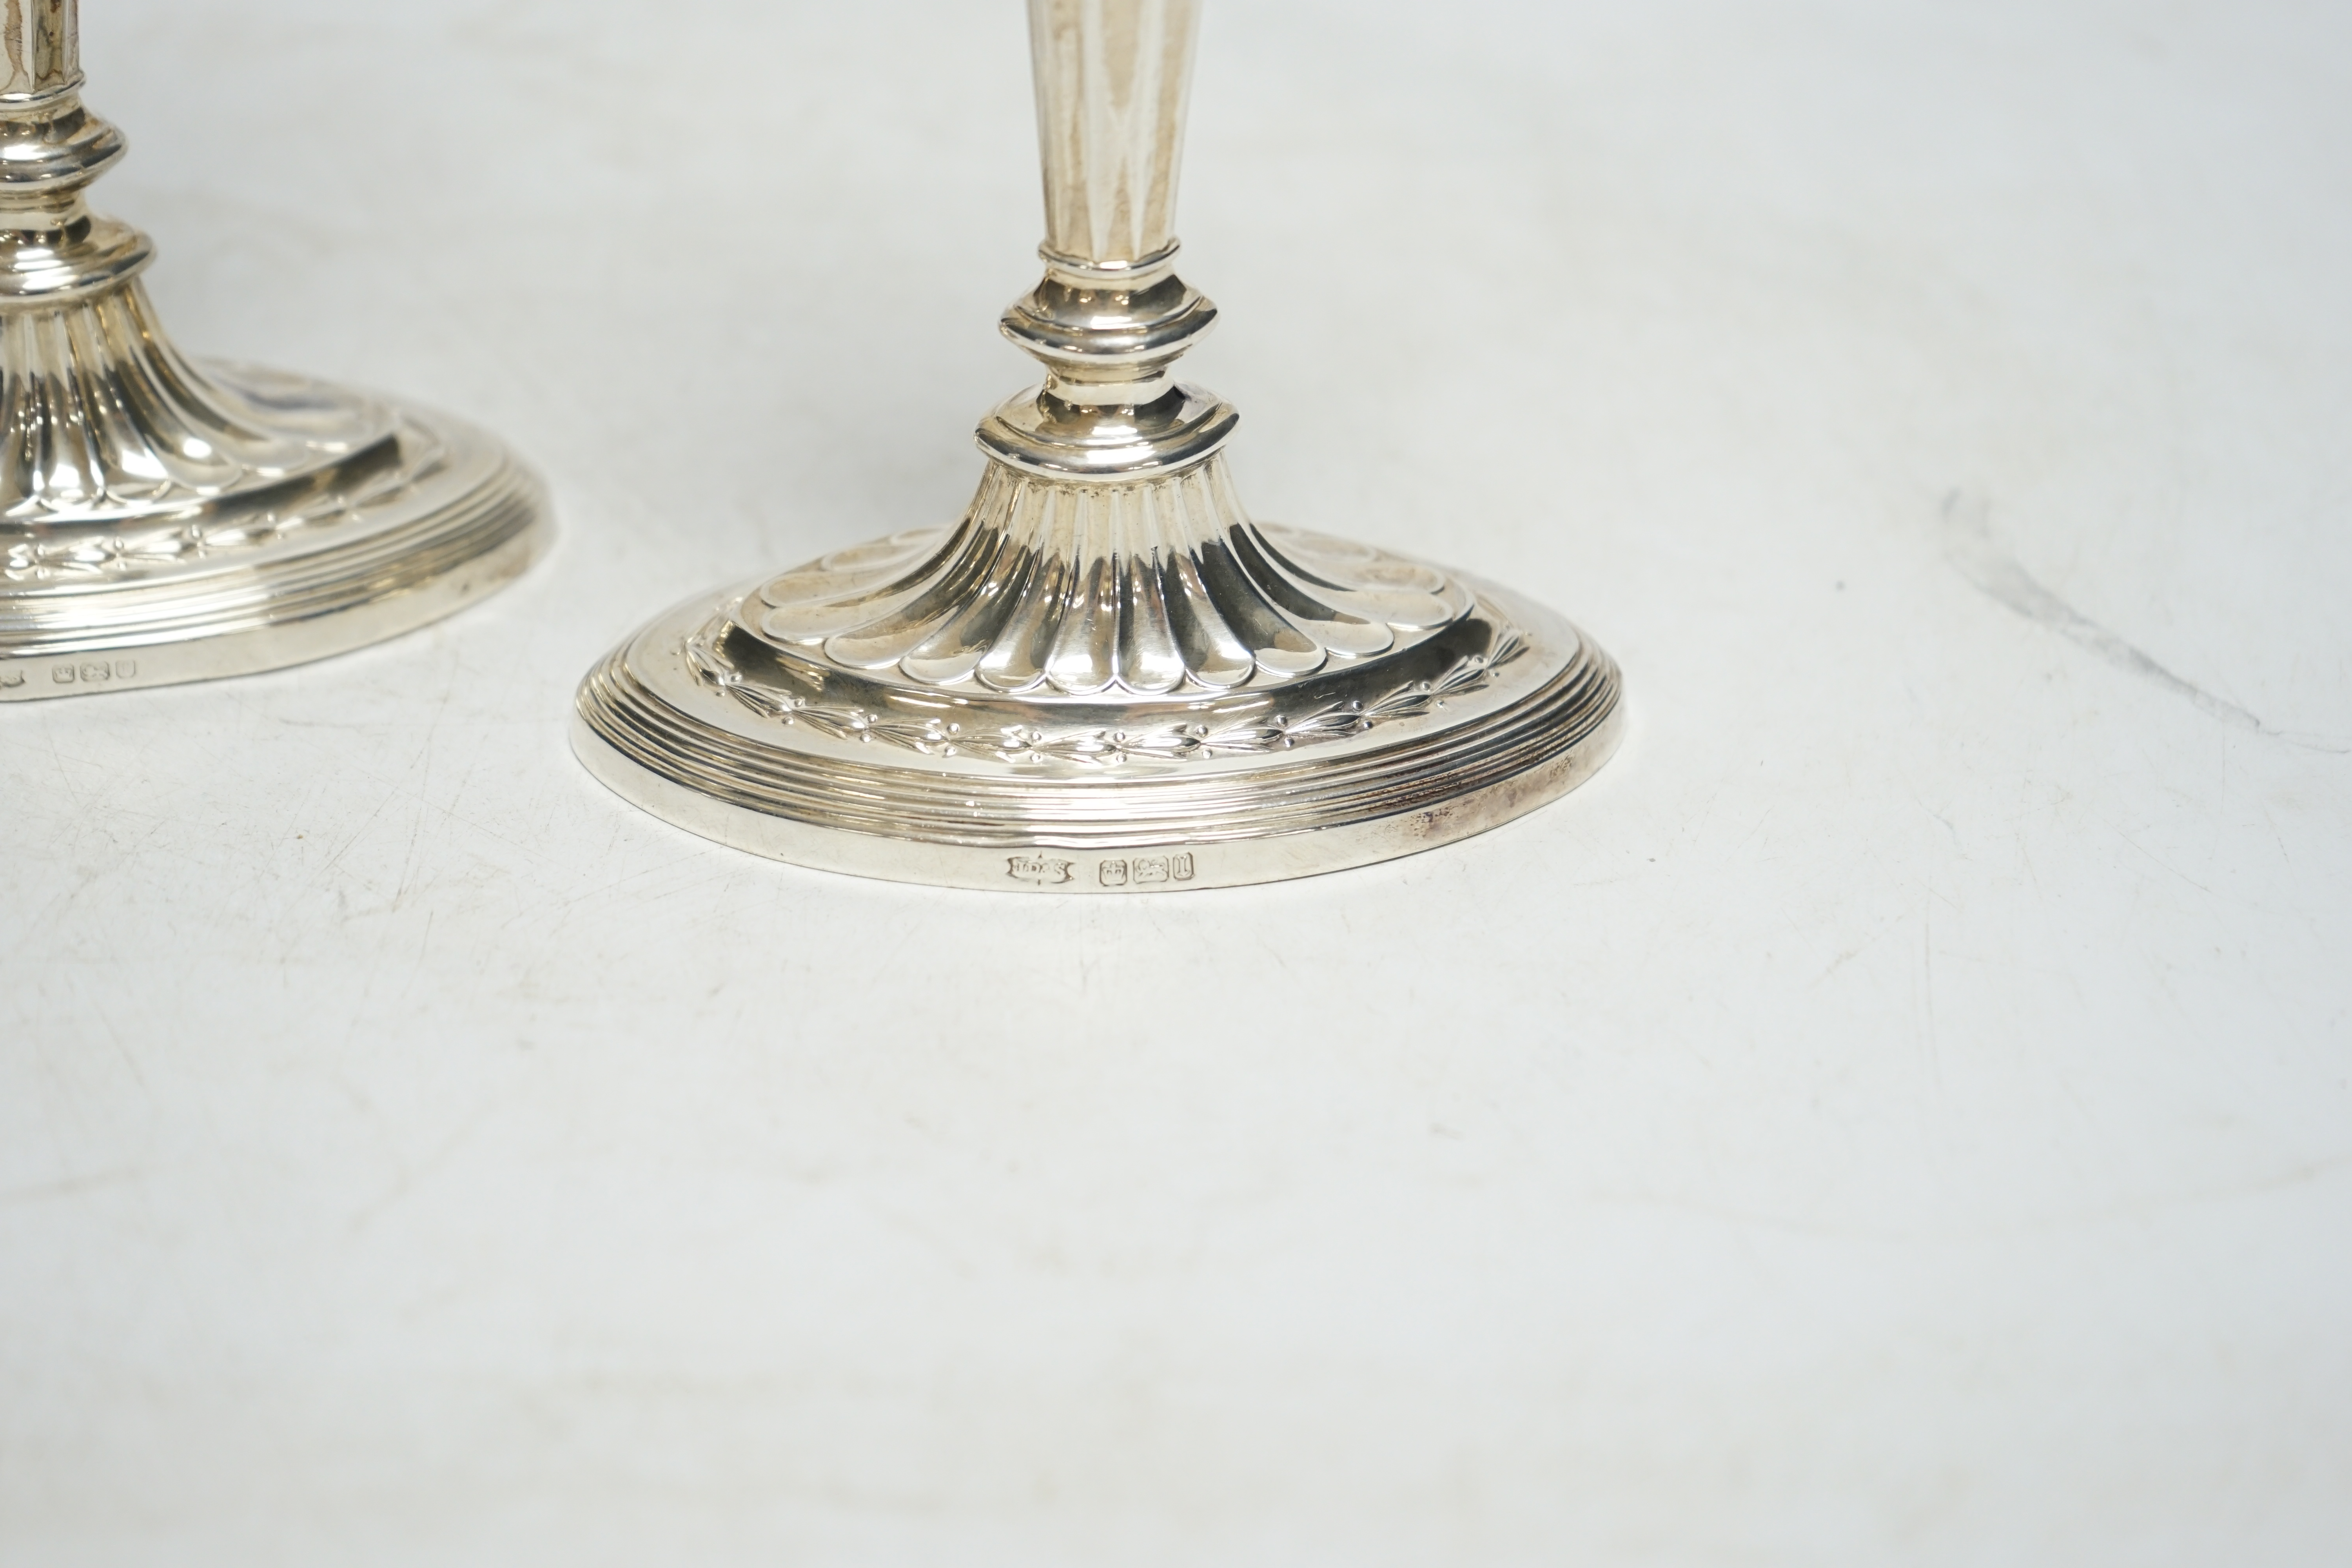 A pair of early 20th century silver oval candlesticks, by James Dixon & Sons, Ltd, Sheffield, 1903 & 1922, 17.2cm, weighted. Condition - fair